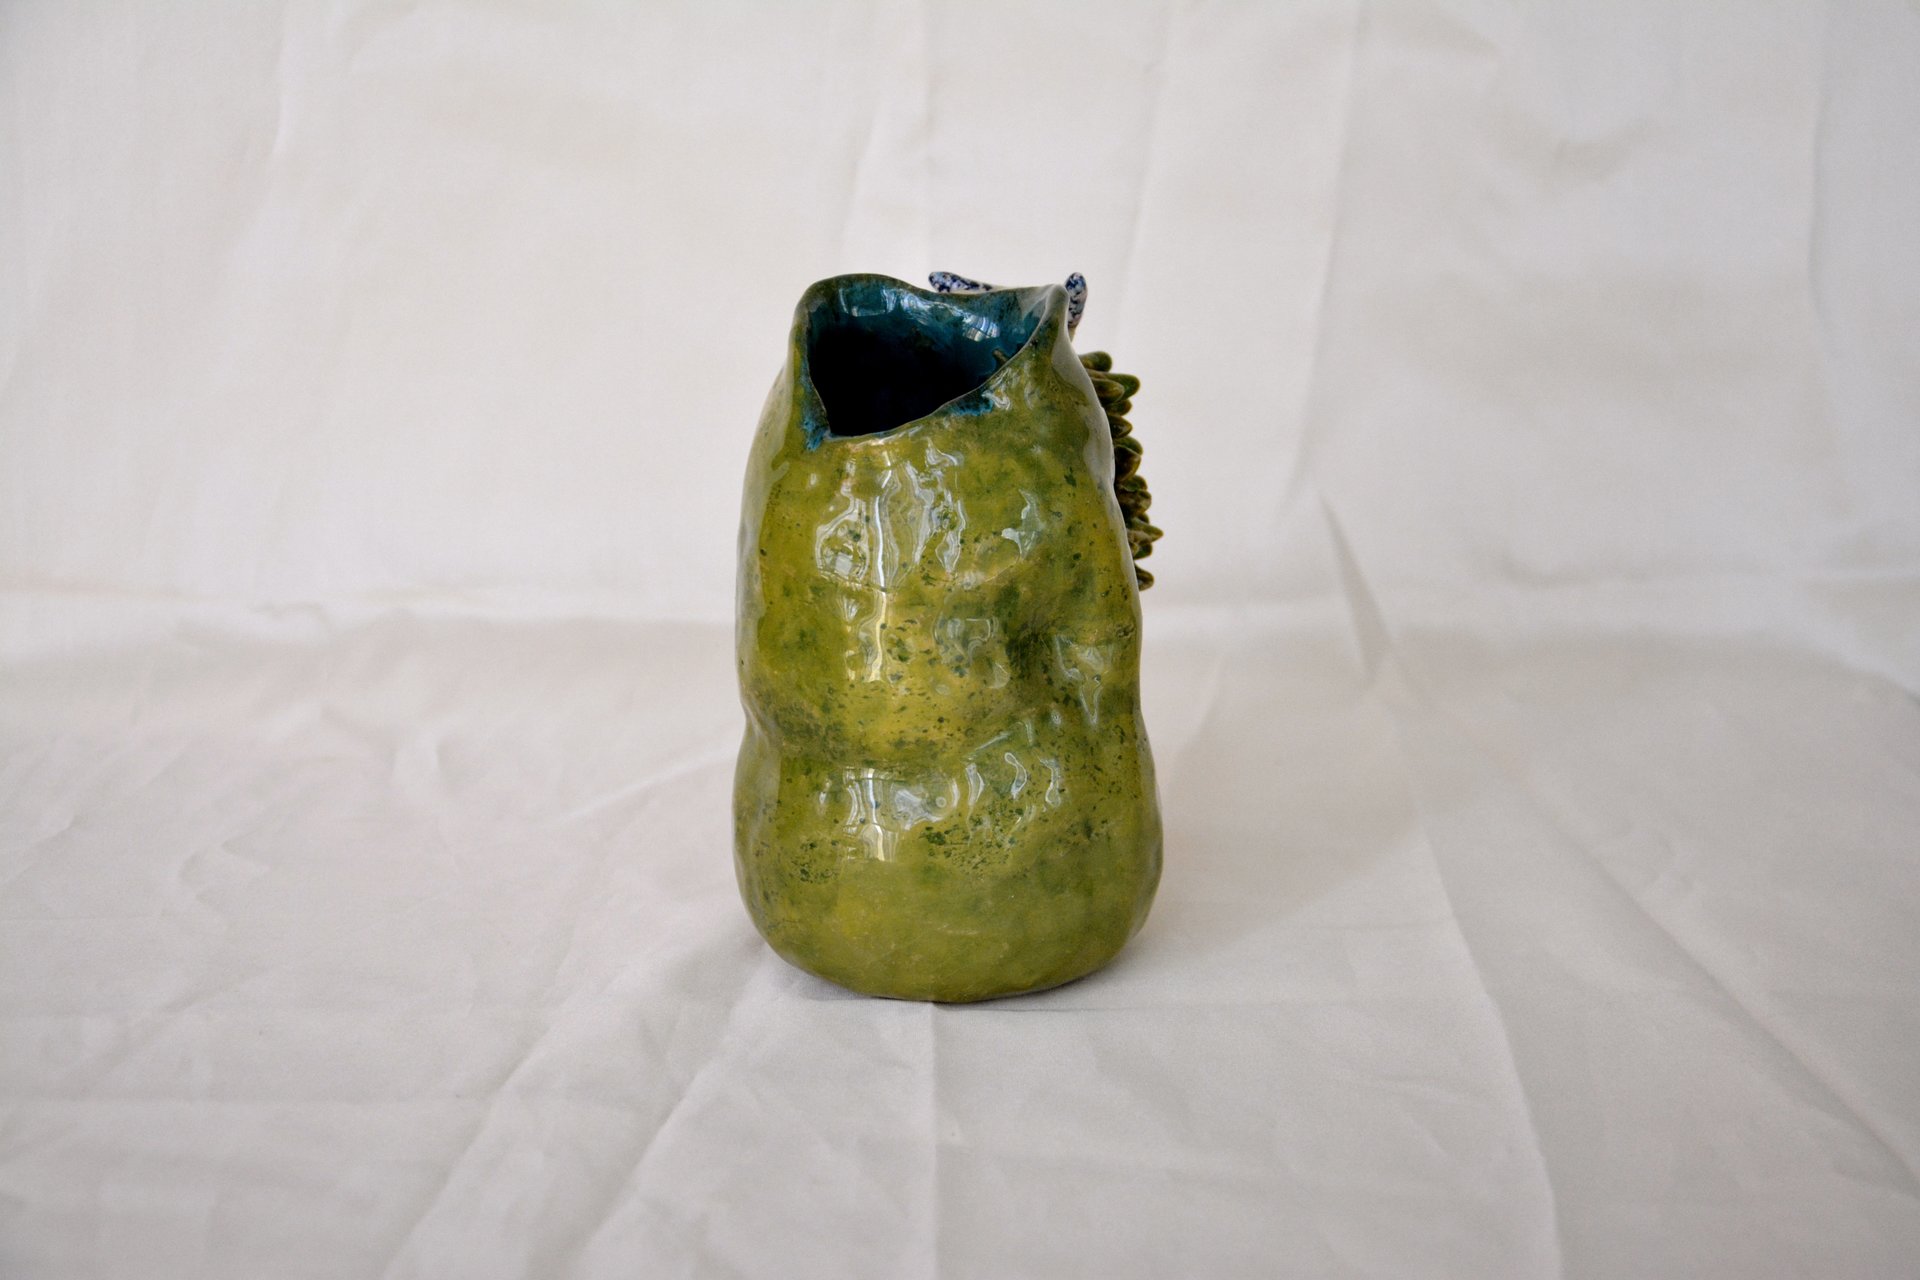 Ceramic vase with a figurine of a sea lamb, height - 14 cm, photo 3 of 4. 338.